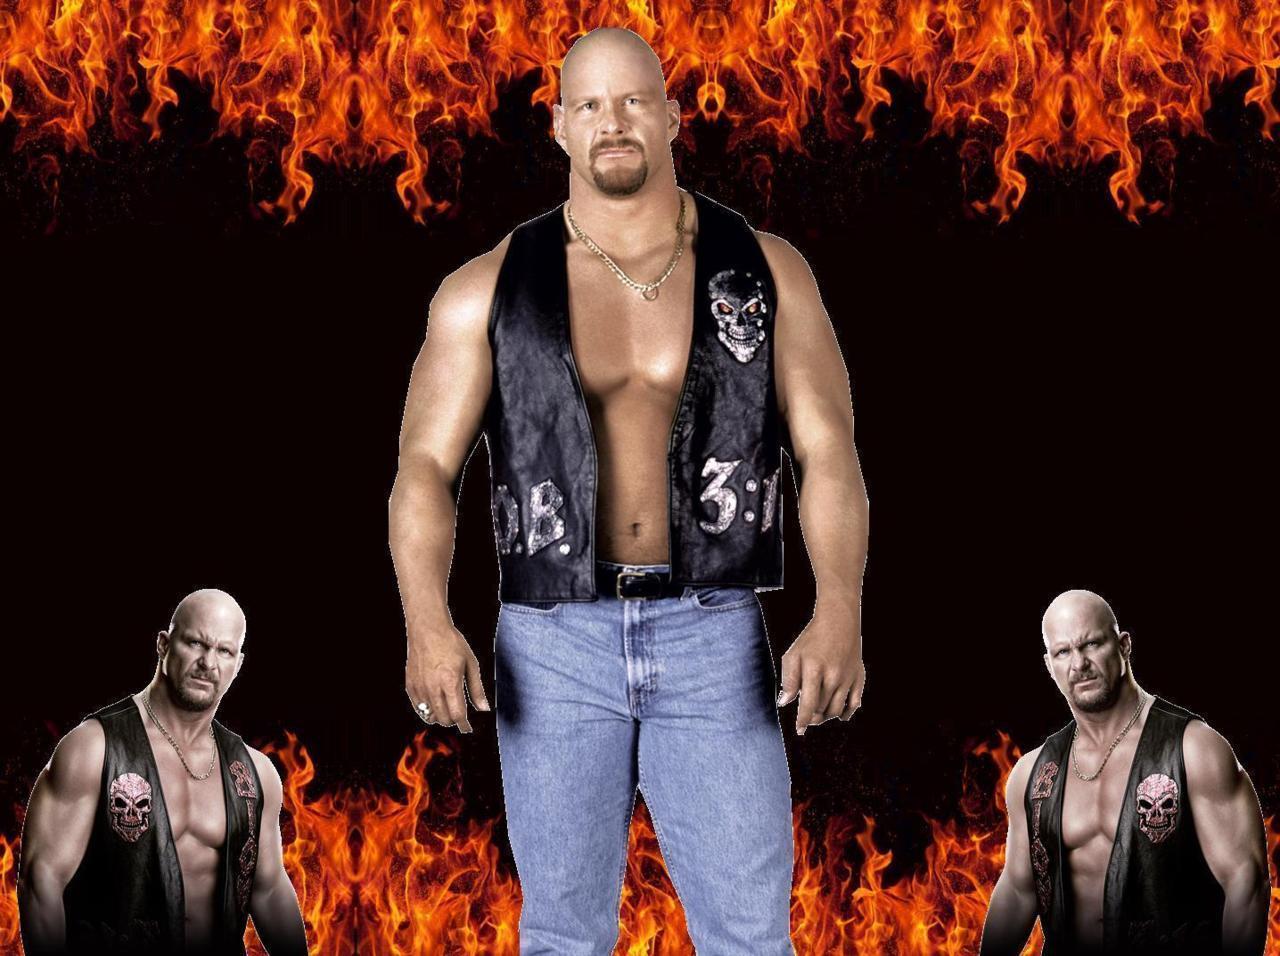 WWE WALLPAPERS: Stone cold. Stone cold wallpaper. stone cold HD